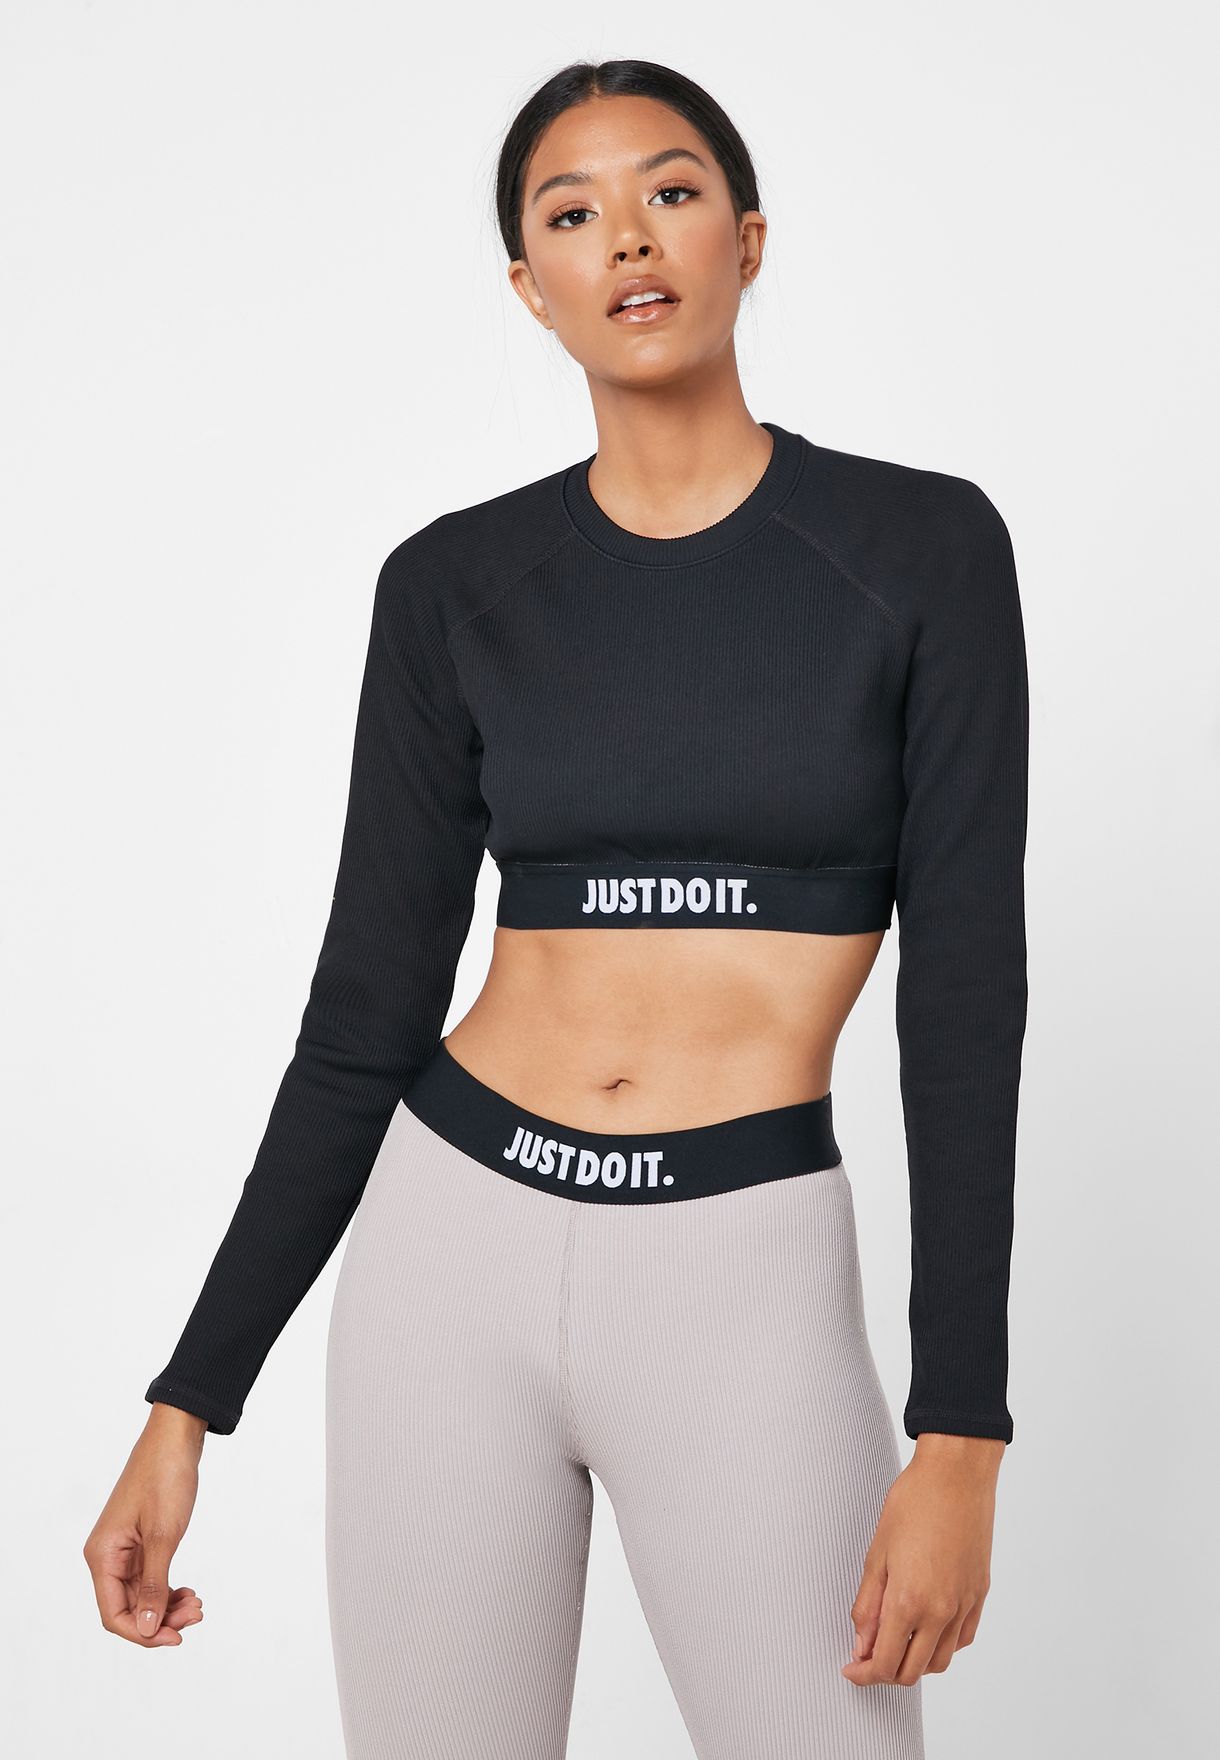 nike crop top just do it